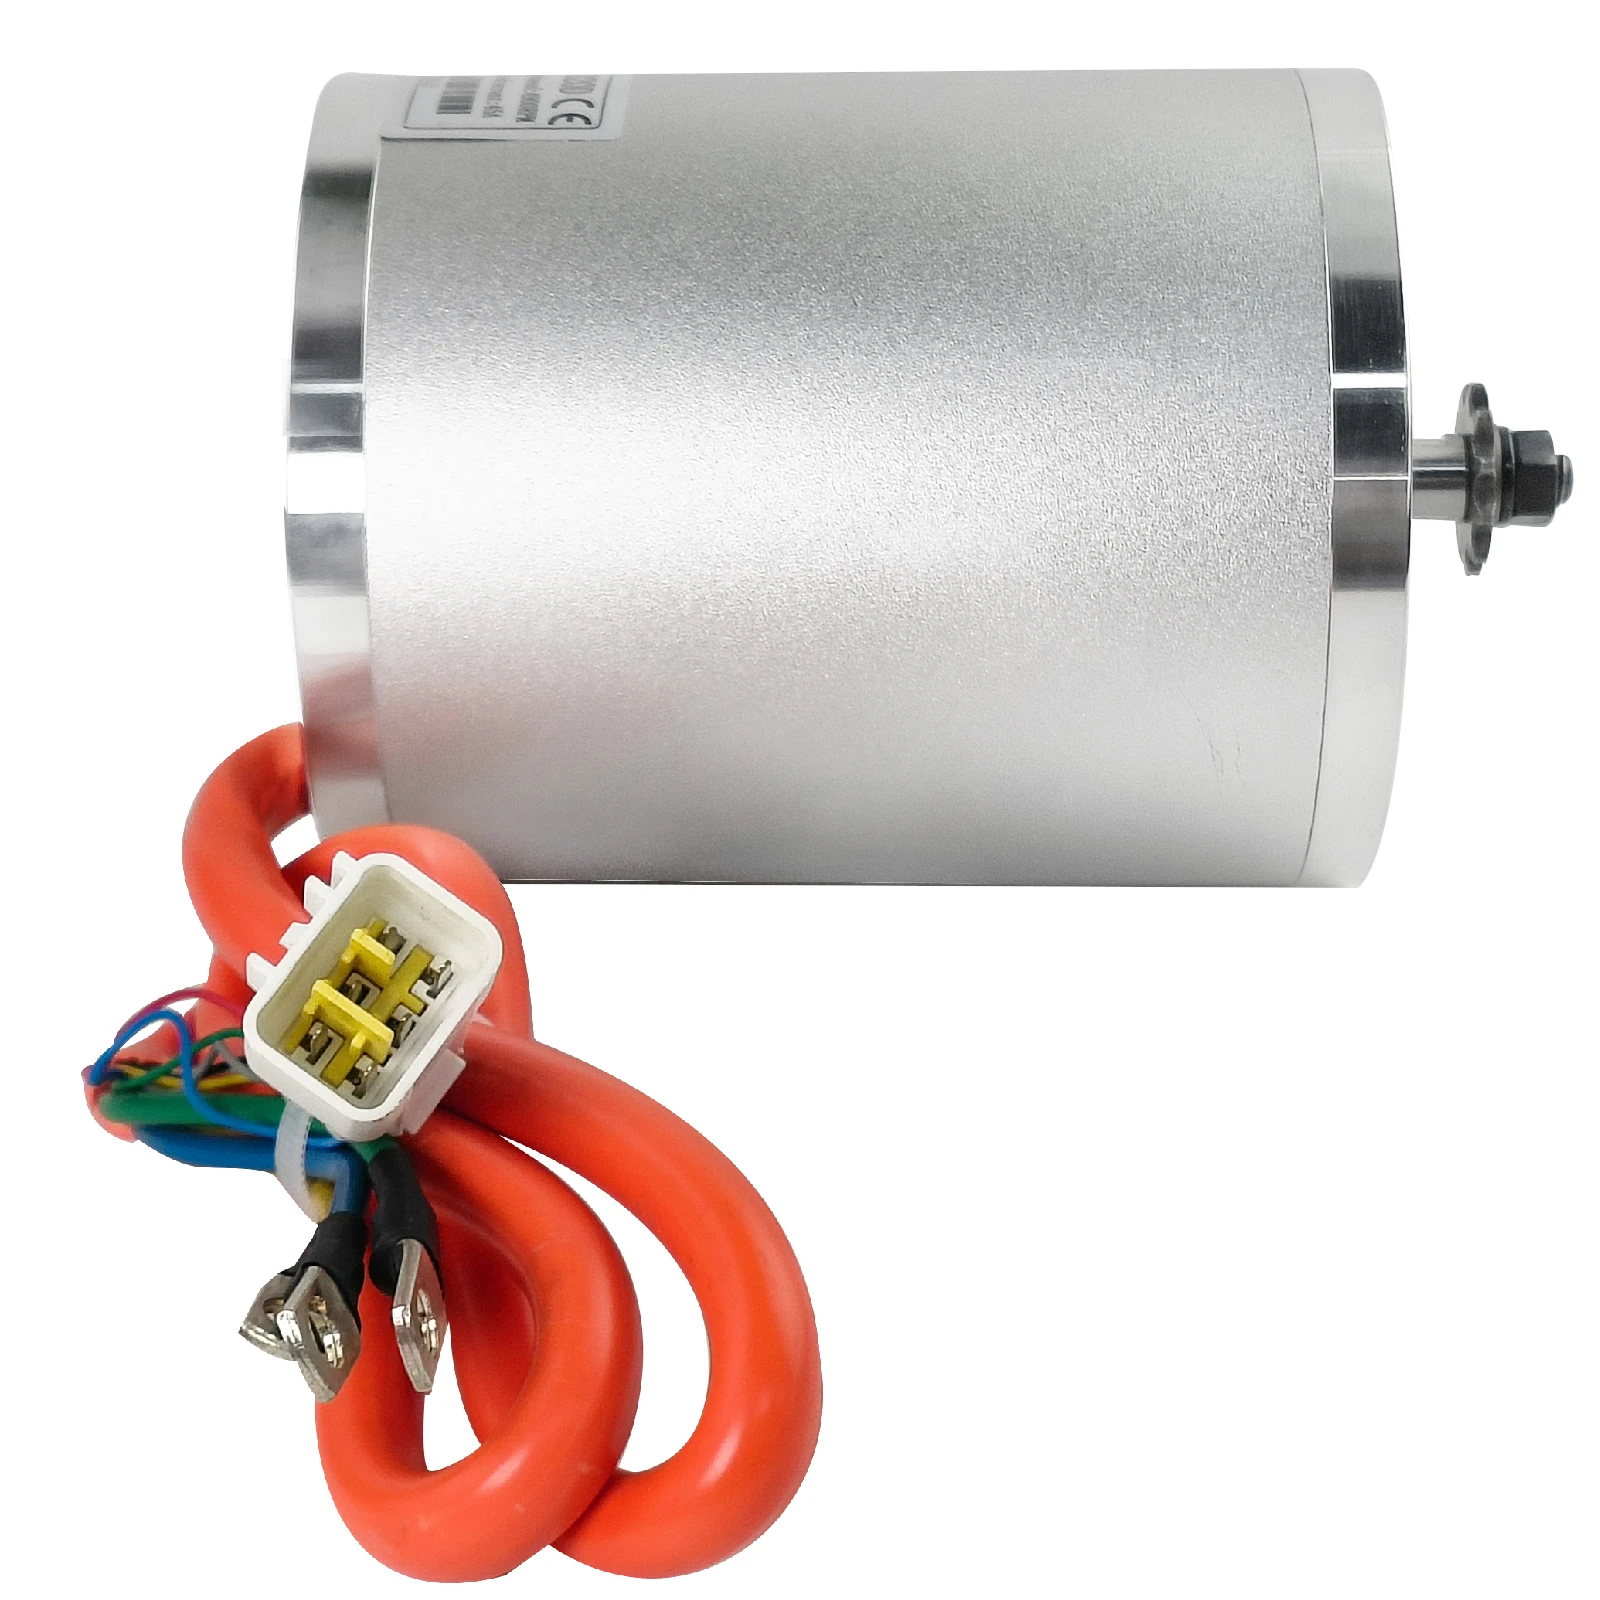 

MY1020 Kunray 48V 2000W 72V 3000W Motor with 6 mm Phase wires Internal Temperature Sensor for John